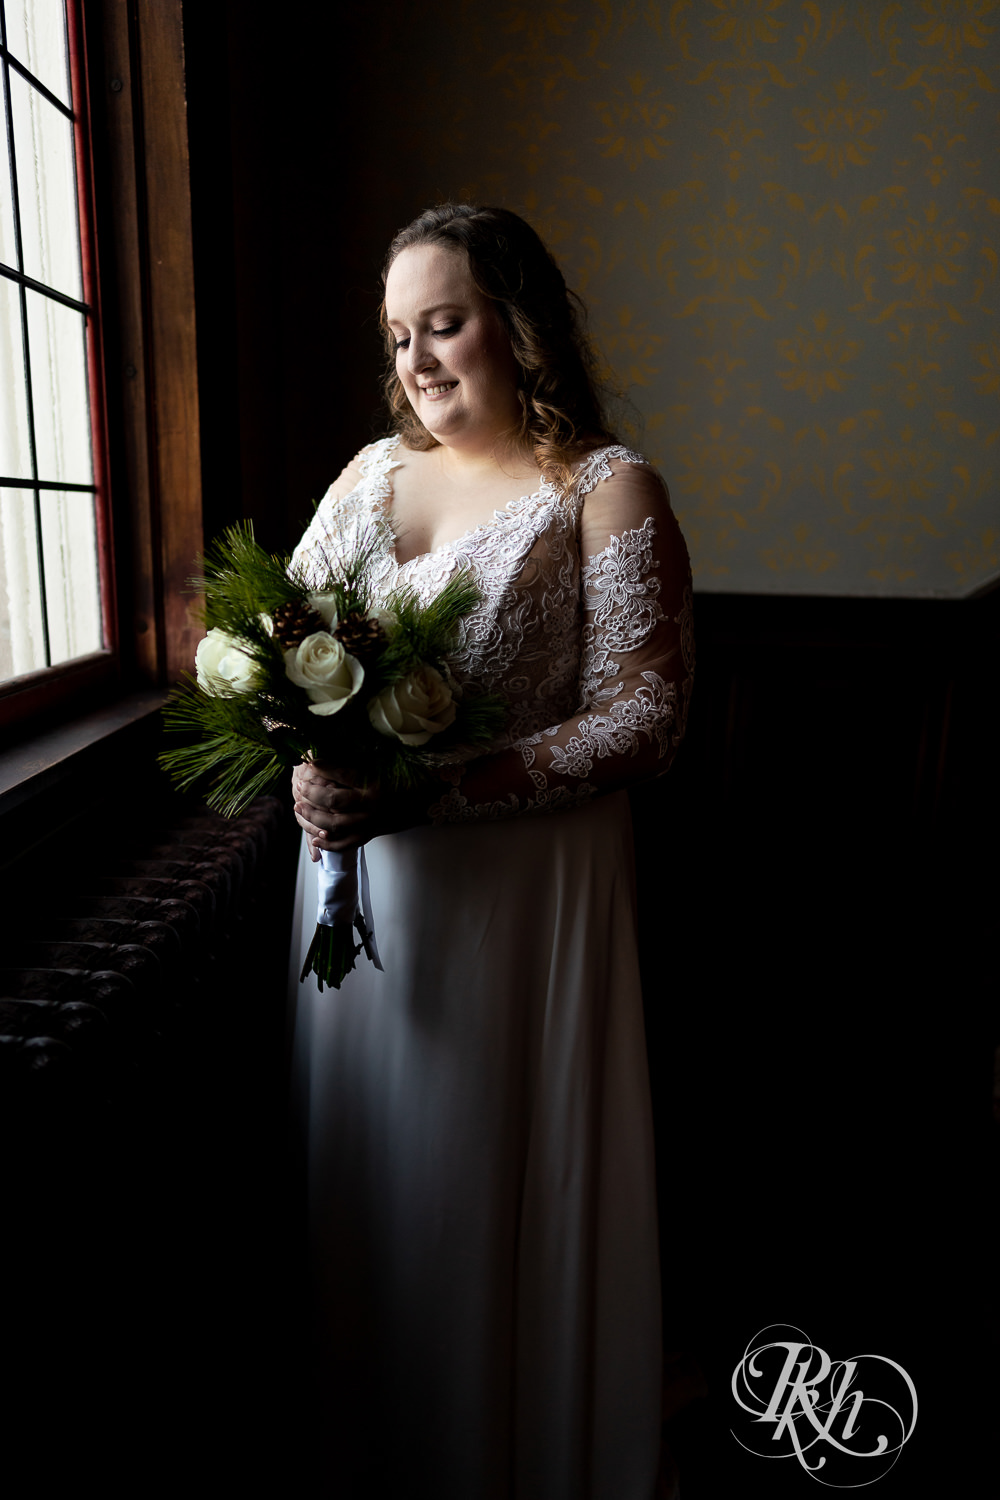 Bride holding flowers standing next to window at Semple Mansion in Minneapolis, Minnesota.